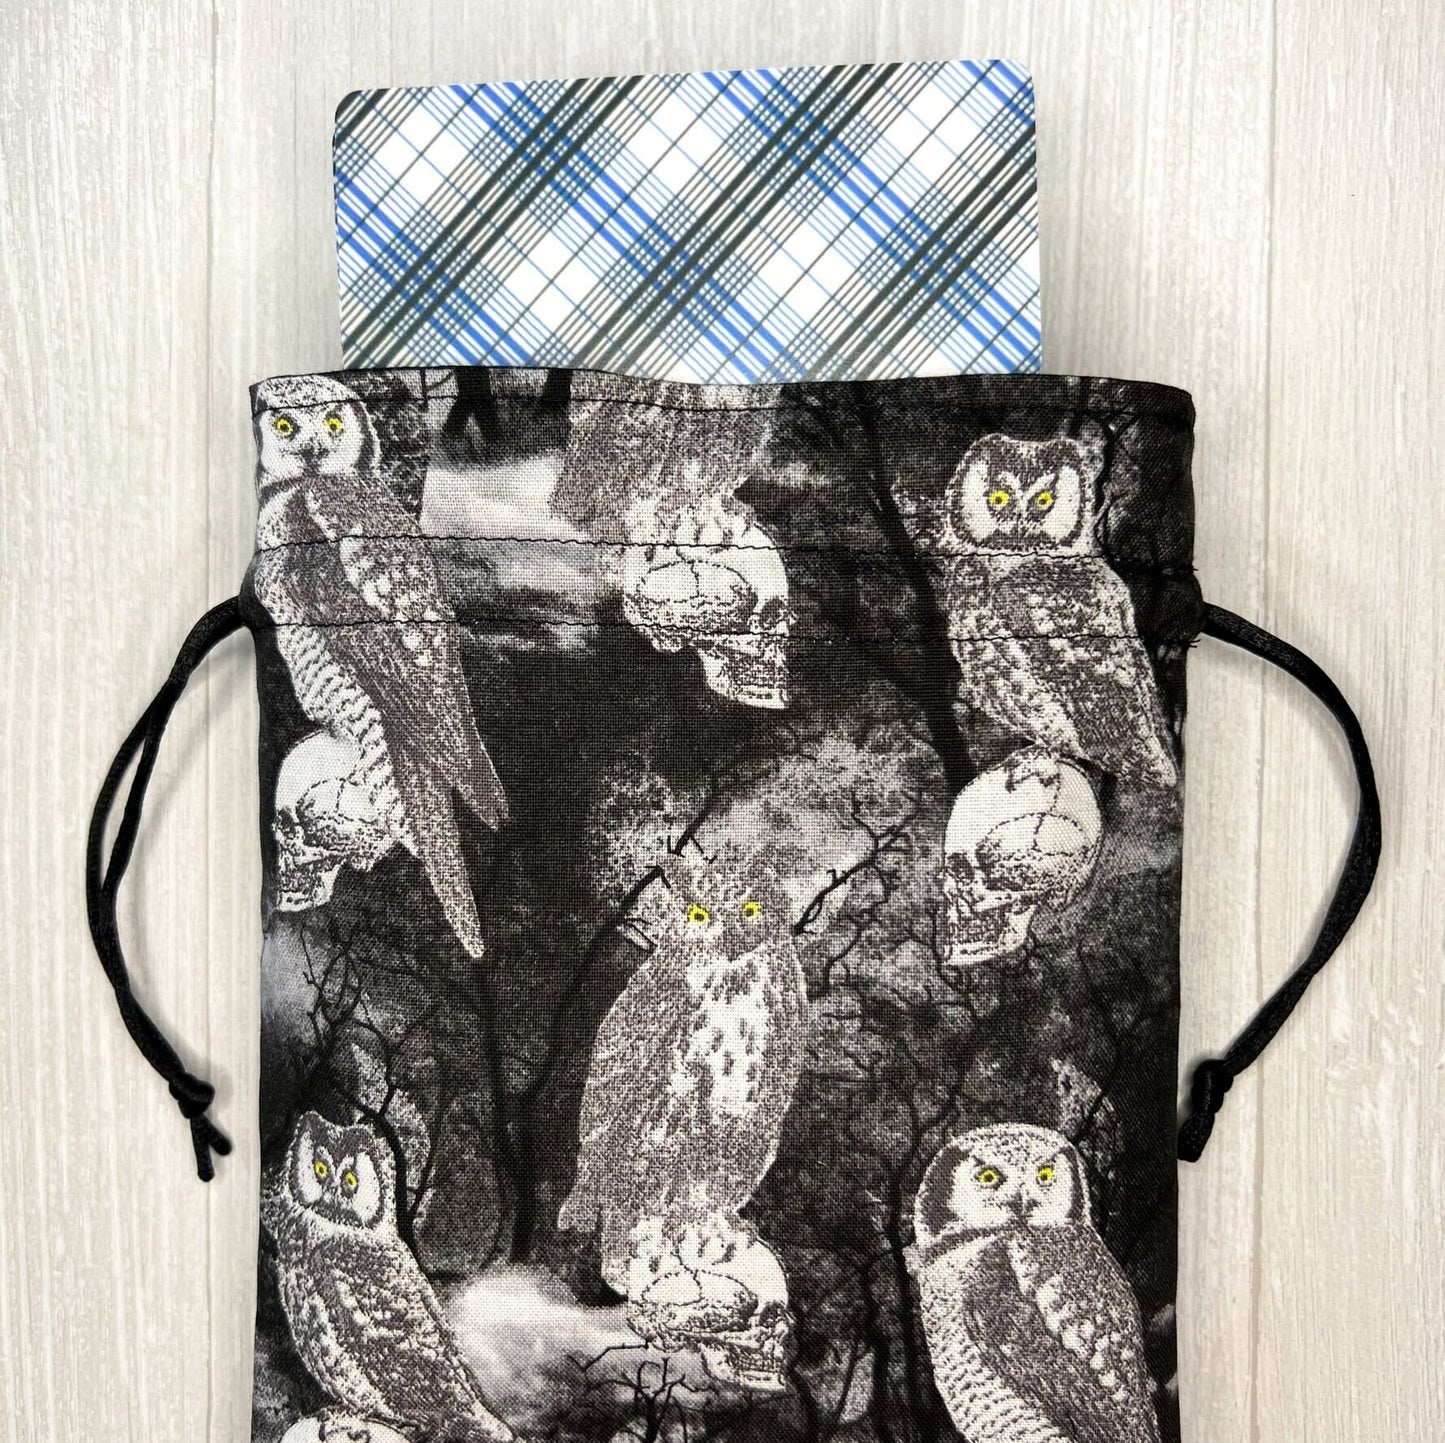 Owl Large Tarot Bag, Drawstring Pouch for Tarot & Oracle Deck, Divination Tools, Giant Tarot Deck, Samhain Witchcraft Wiccan Gift Supplies